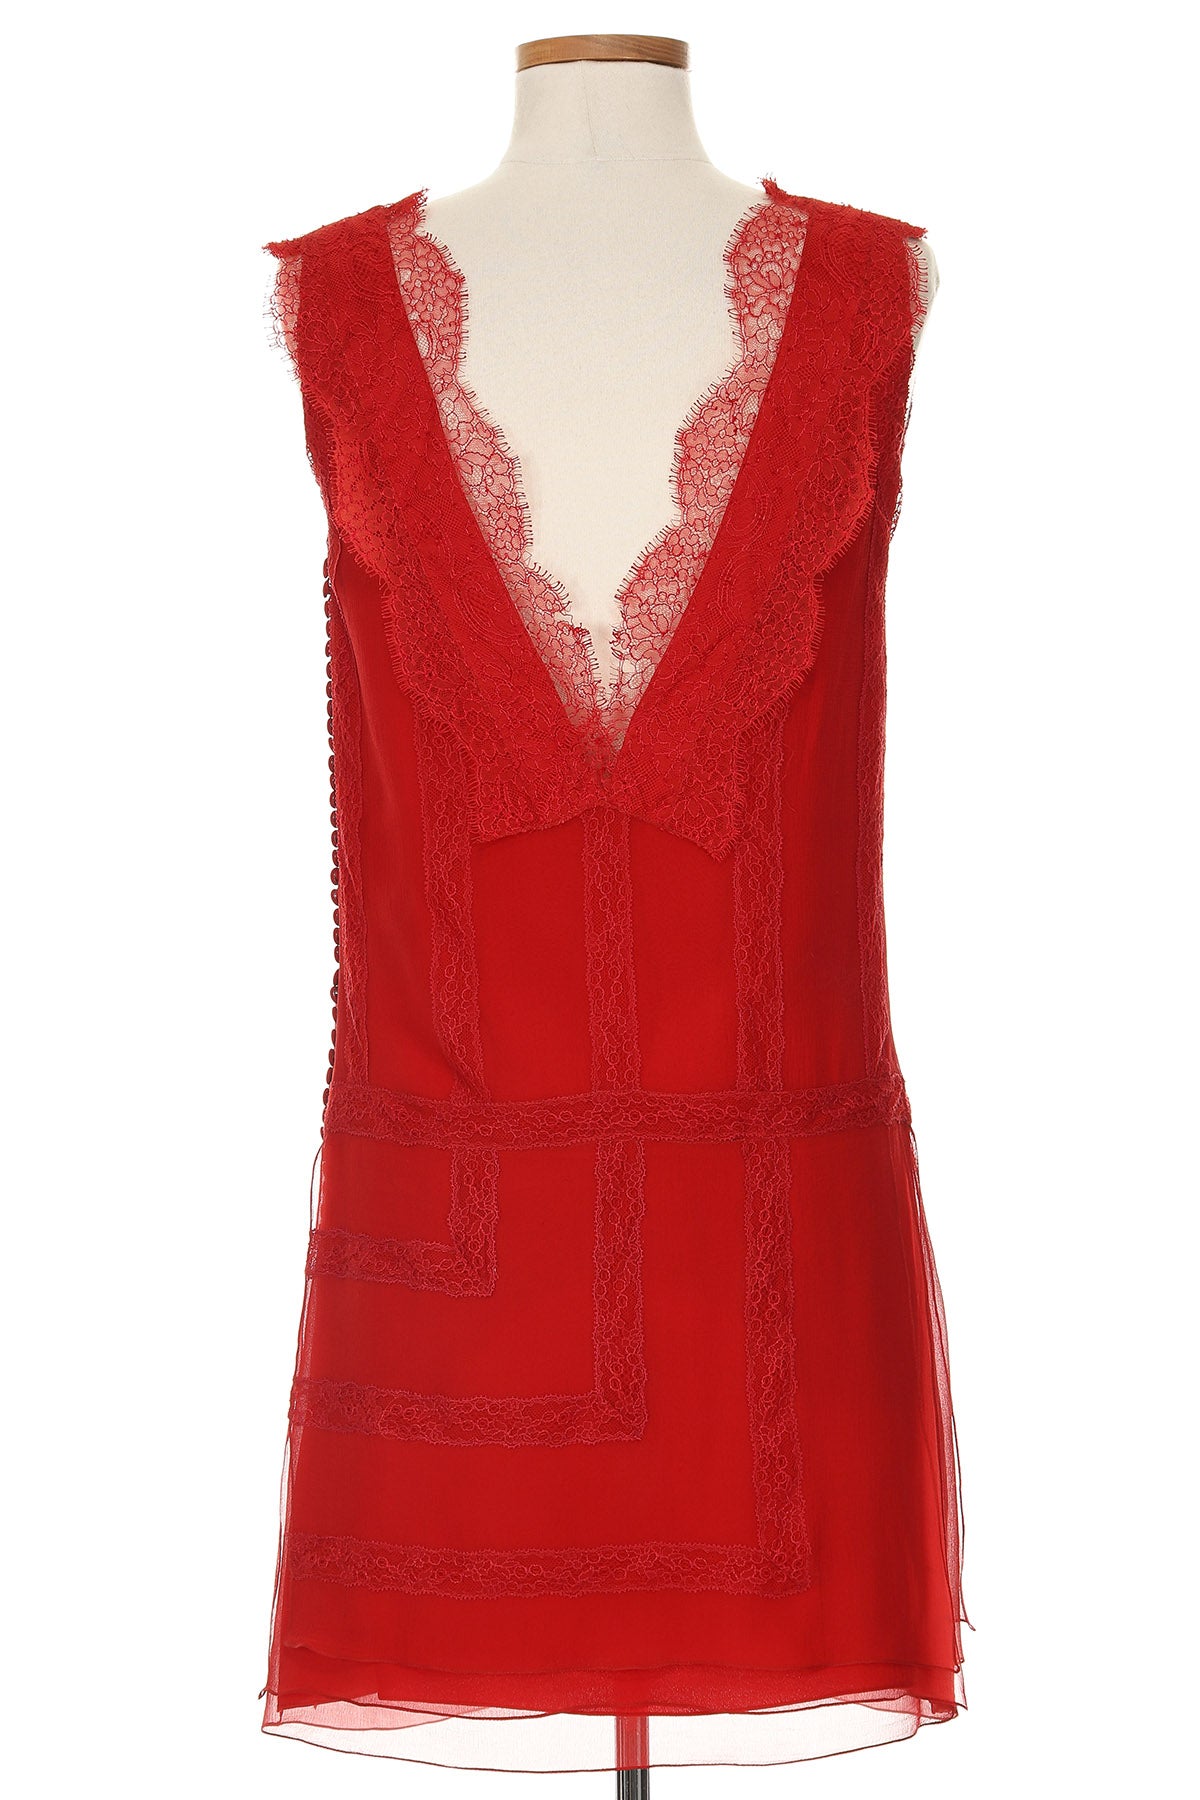 Christian Dior Fall 2011 Red Lace Shift Dress